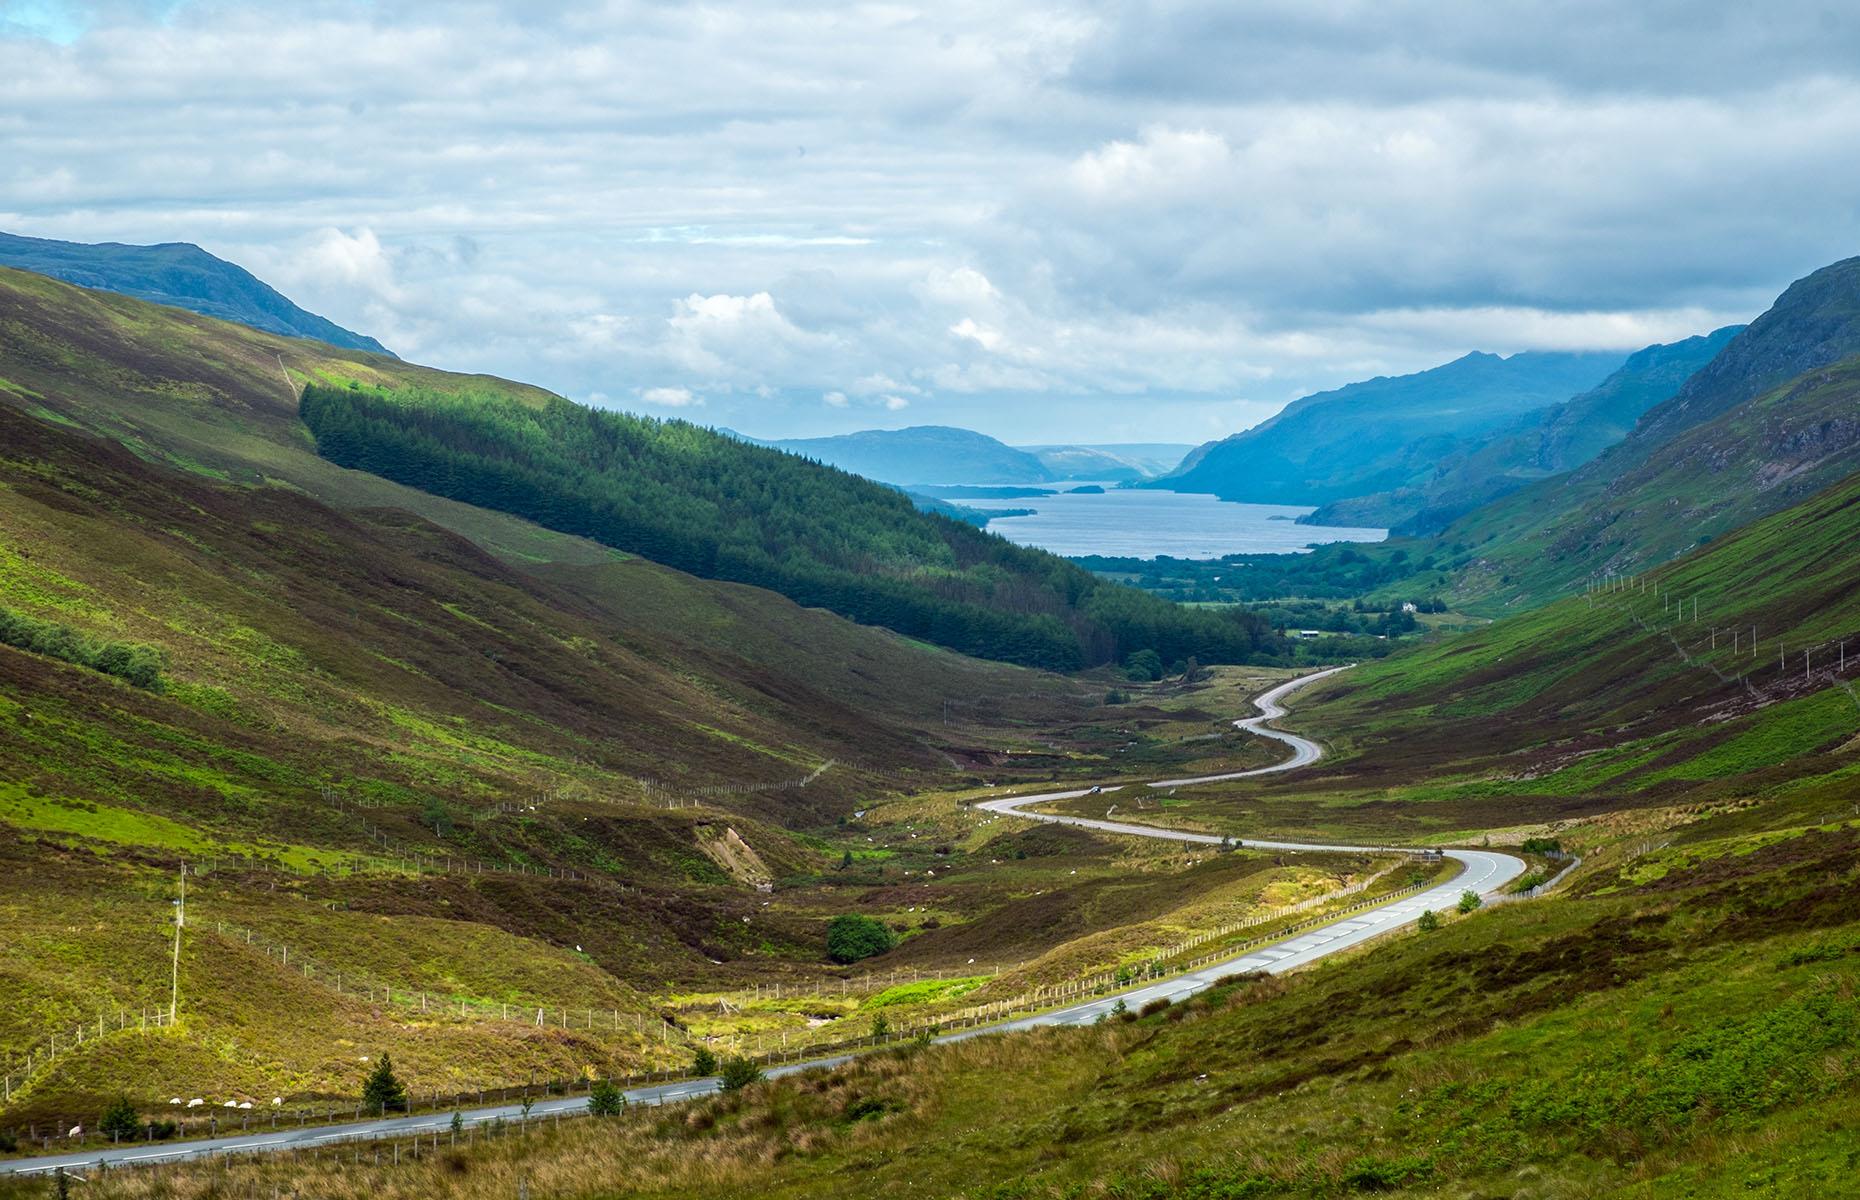 Dubbed Scotland’s answer to Route 66, the North Coast 500 traces the coast of the North Highlands, taking in vast lochs, enchanting castles, white sand beaches, and dramatic cliffs. The 500-mile route starts and ends at Inverness, the capital of the Highlands.